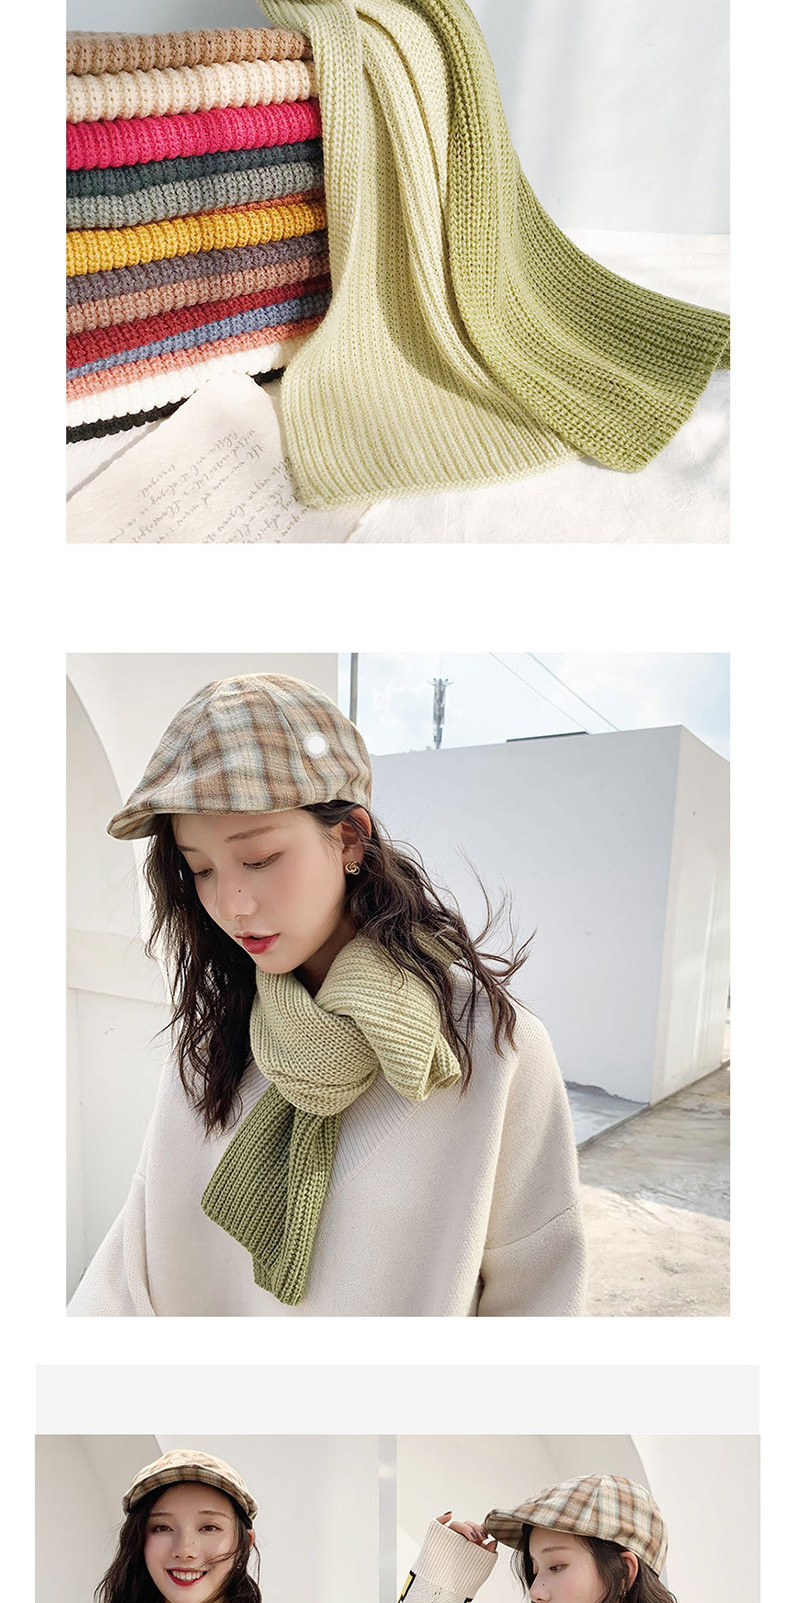 Fashion Two-color Stitching Light Green + Bean Green Stitched Two-tone Knit Short Scarf,knitting Wool Scaves